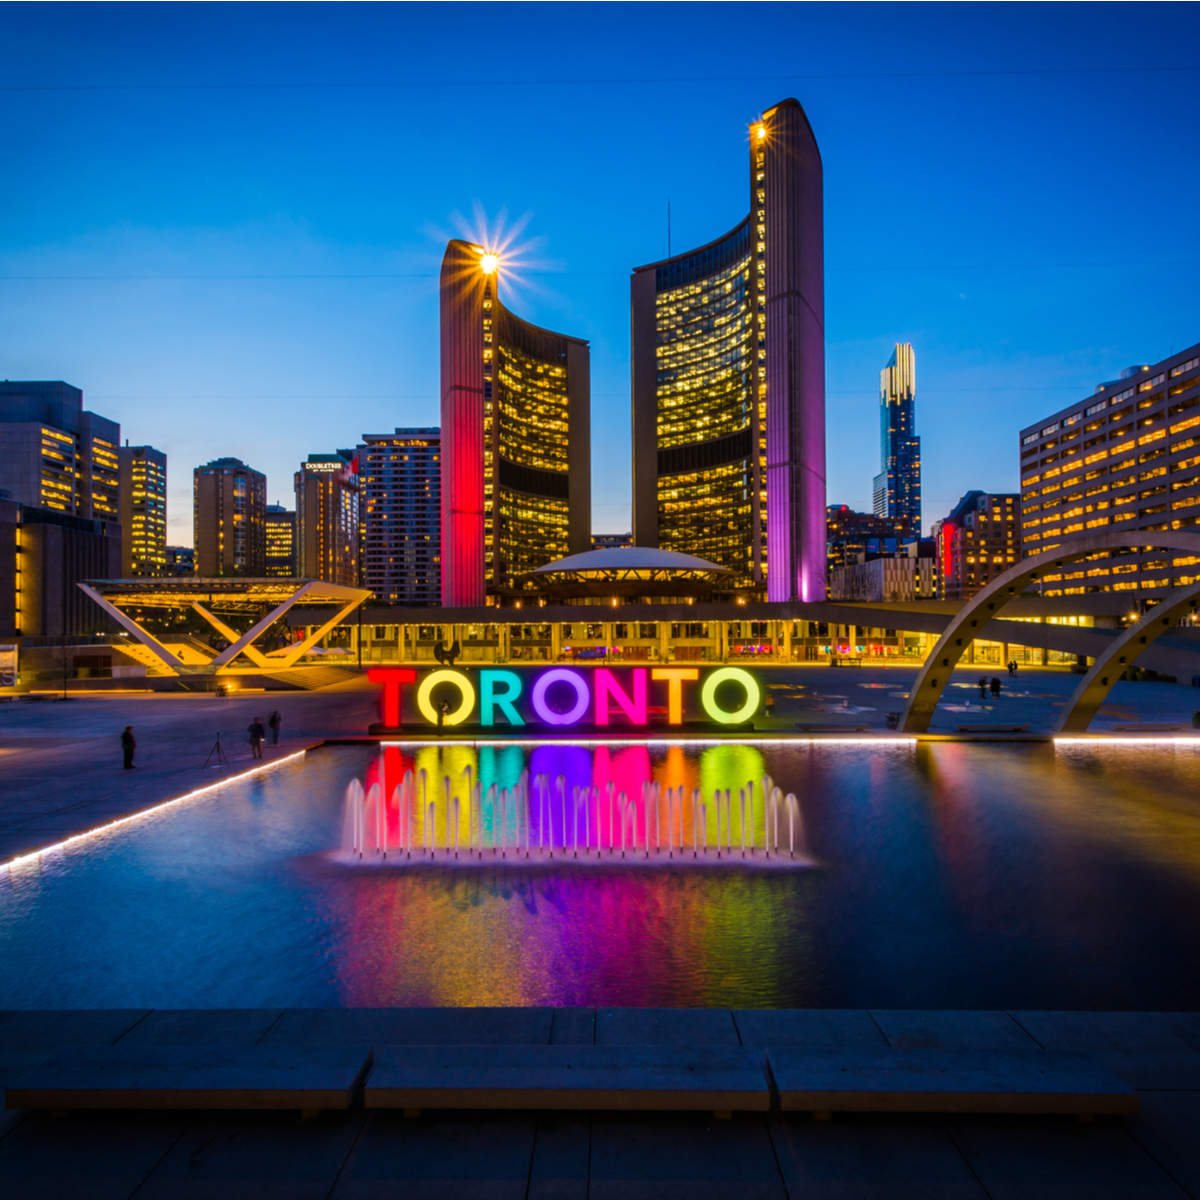 Buy Weed Online In Toronto Downtown At Night